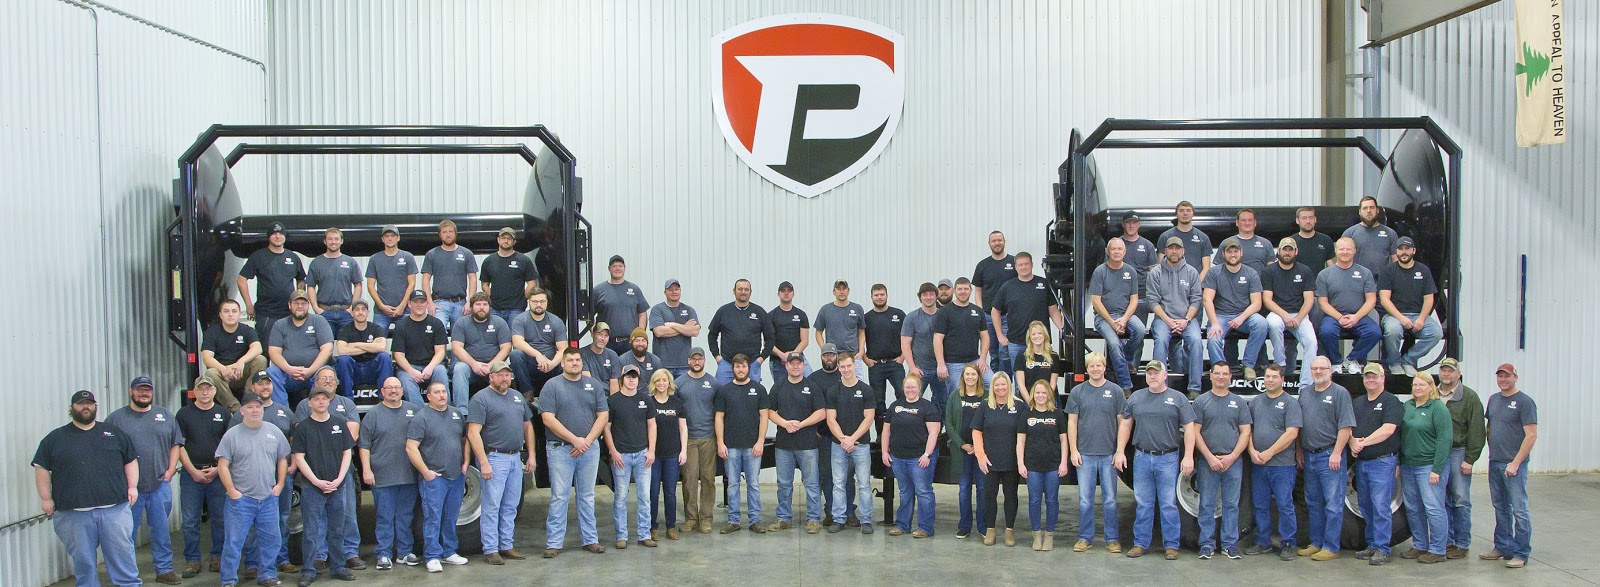 Puck Enterprises: 40 Years of Excellence Here in Western Iowa! Photo